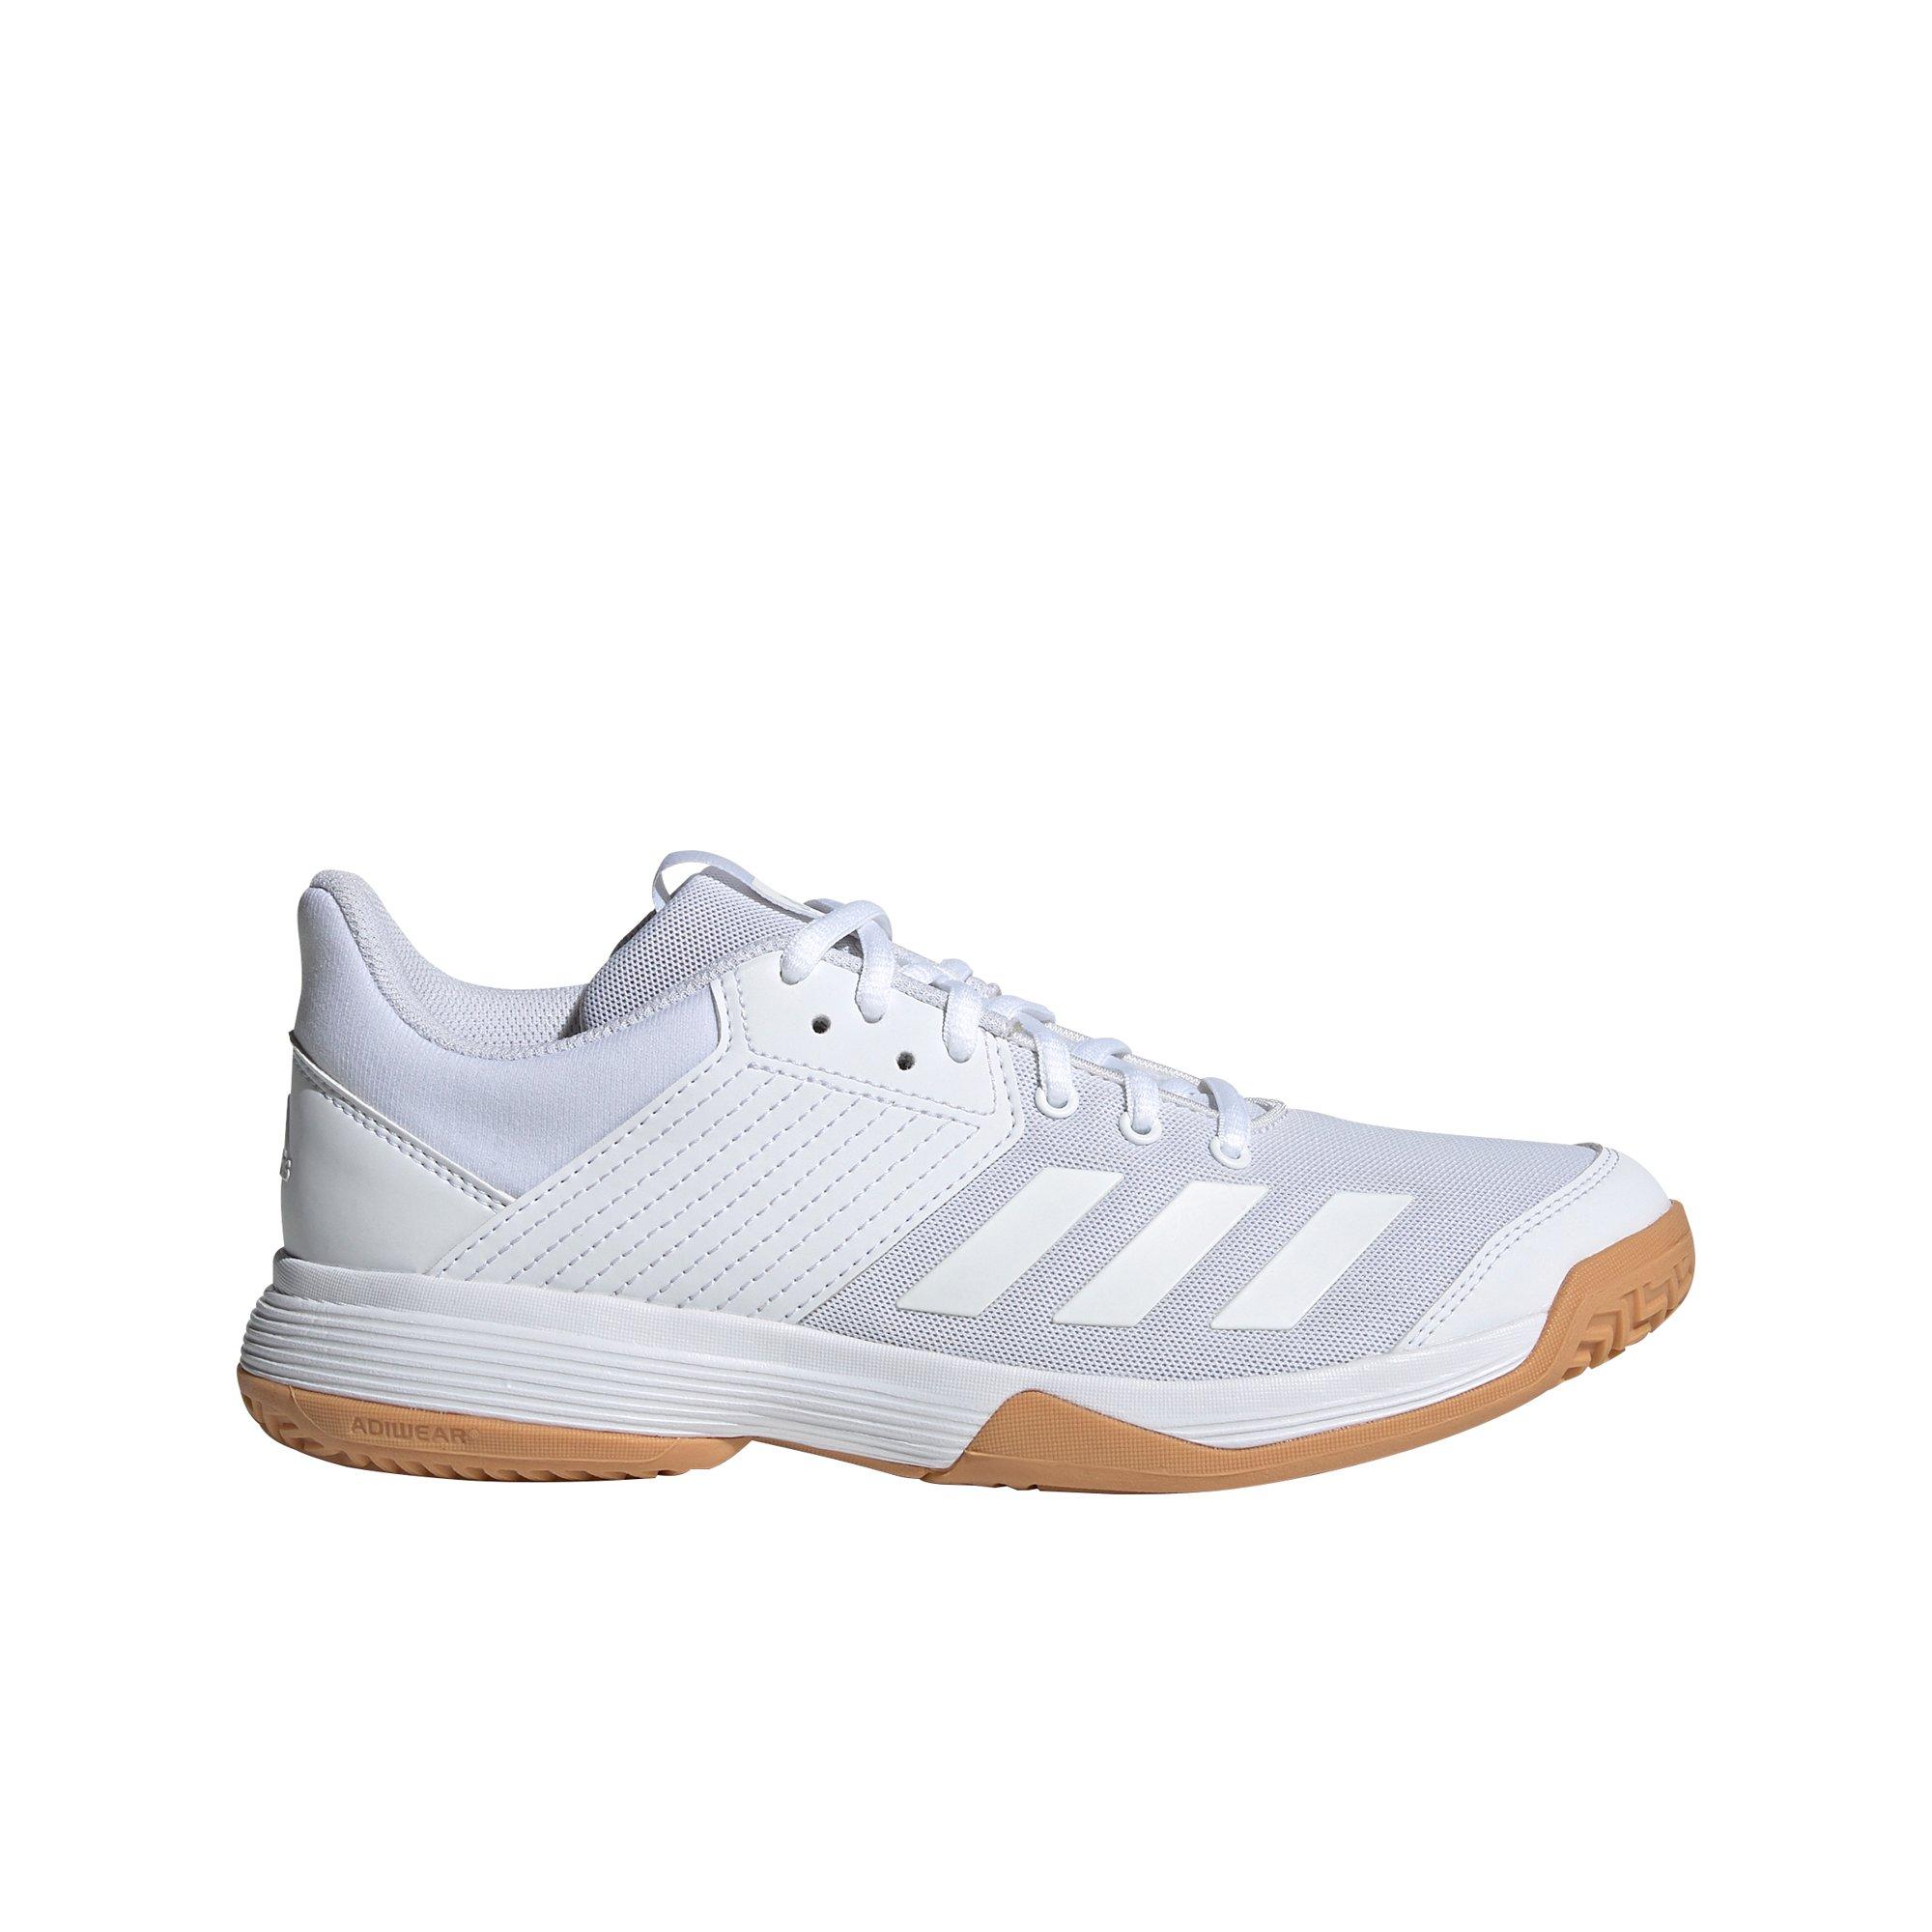 white adidas shoes volleyball